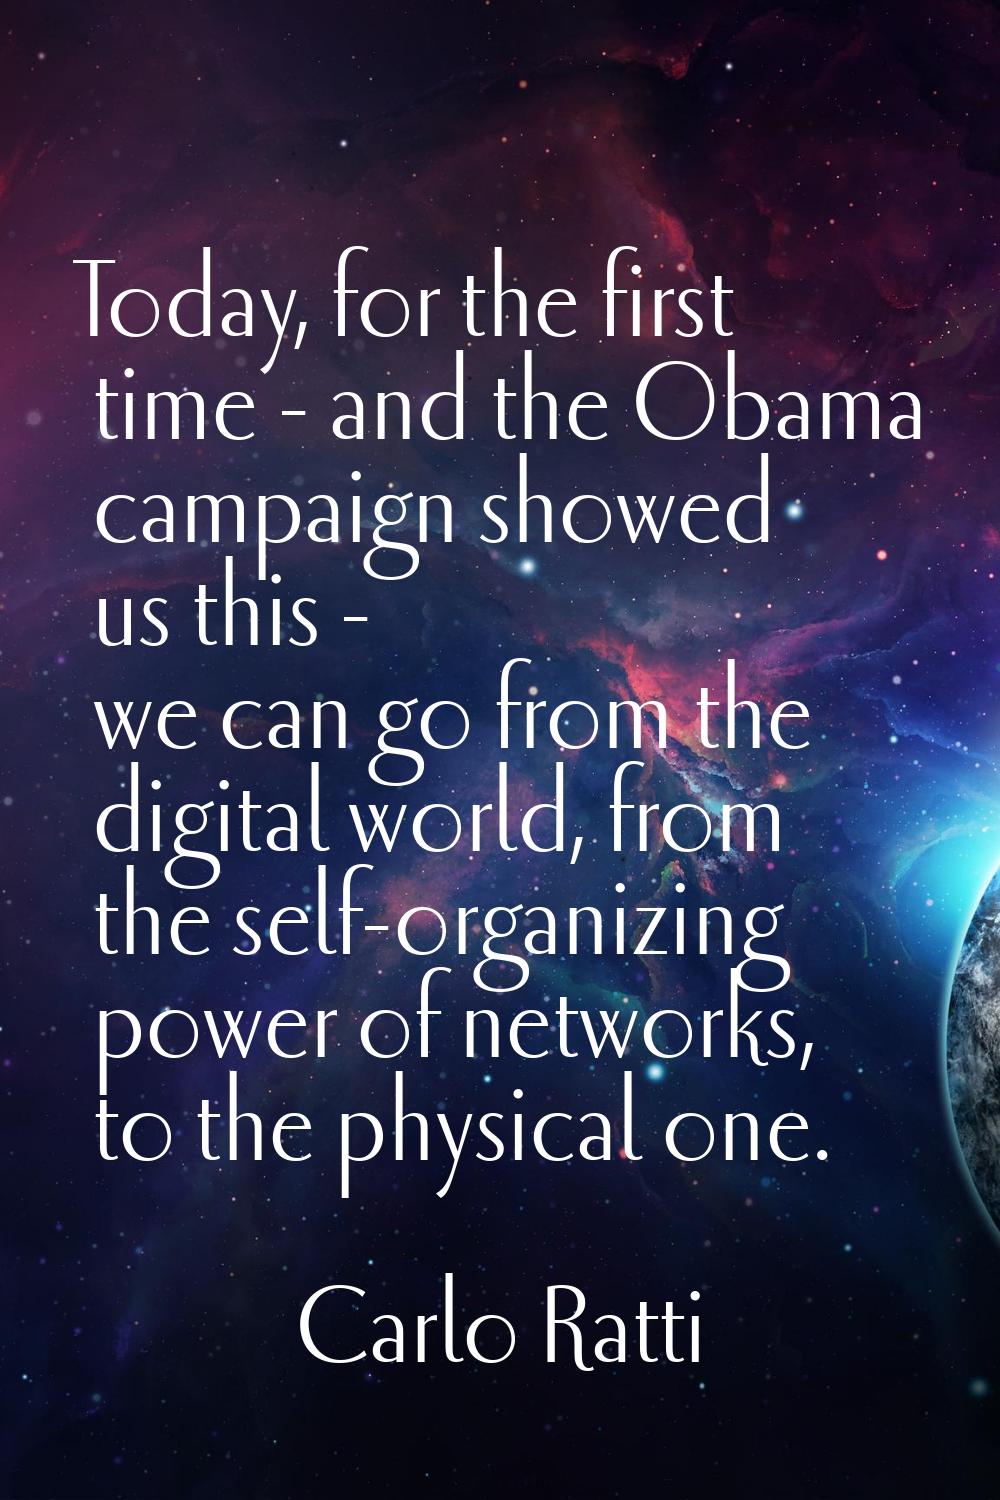 Today, for the first time - and the Obama campaign showed us this - we can go from the digital worl